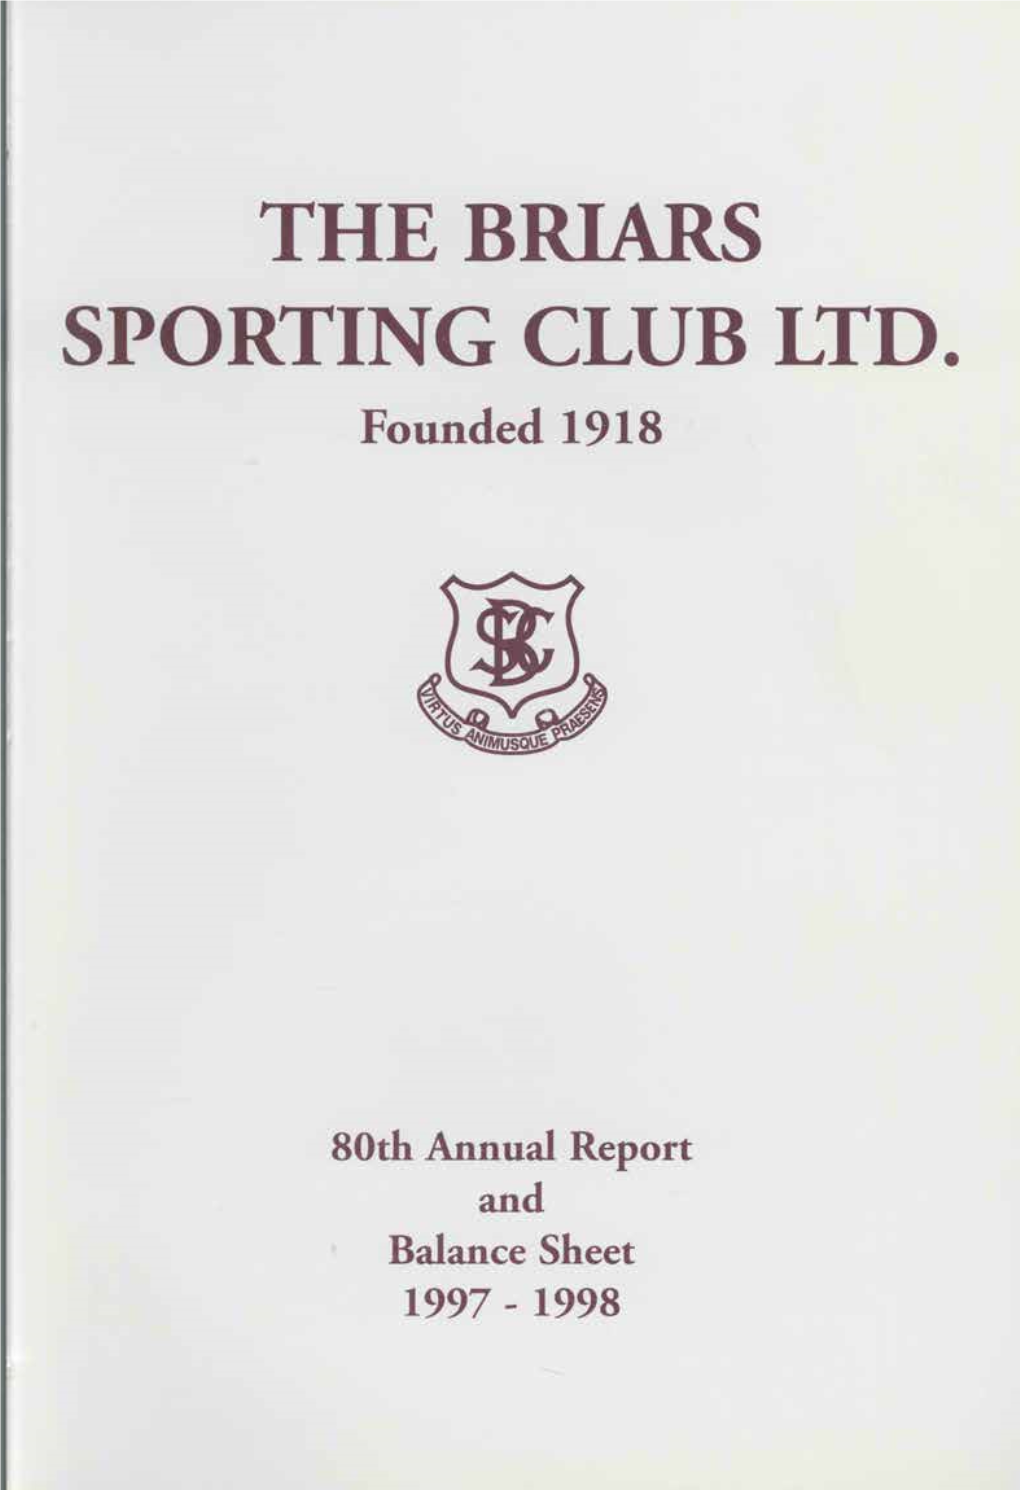 THE BRIARS SPORTING CLUB LTD. Founded 1918